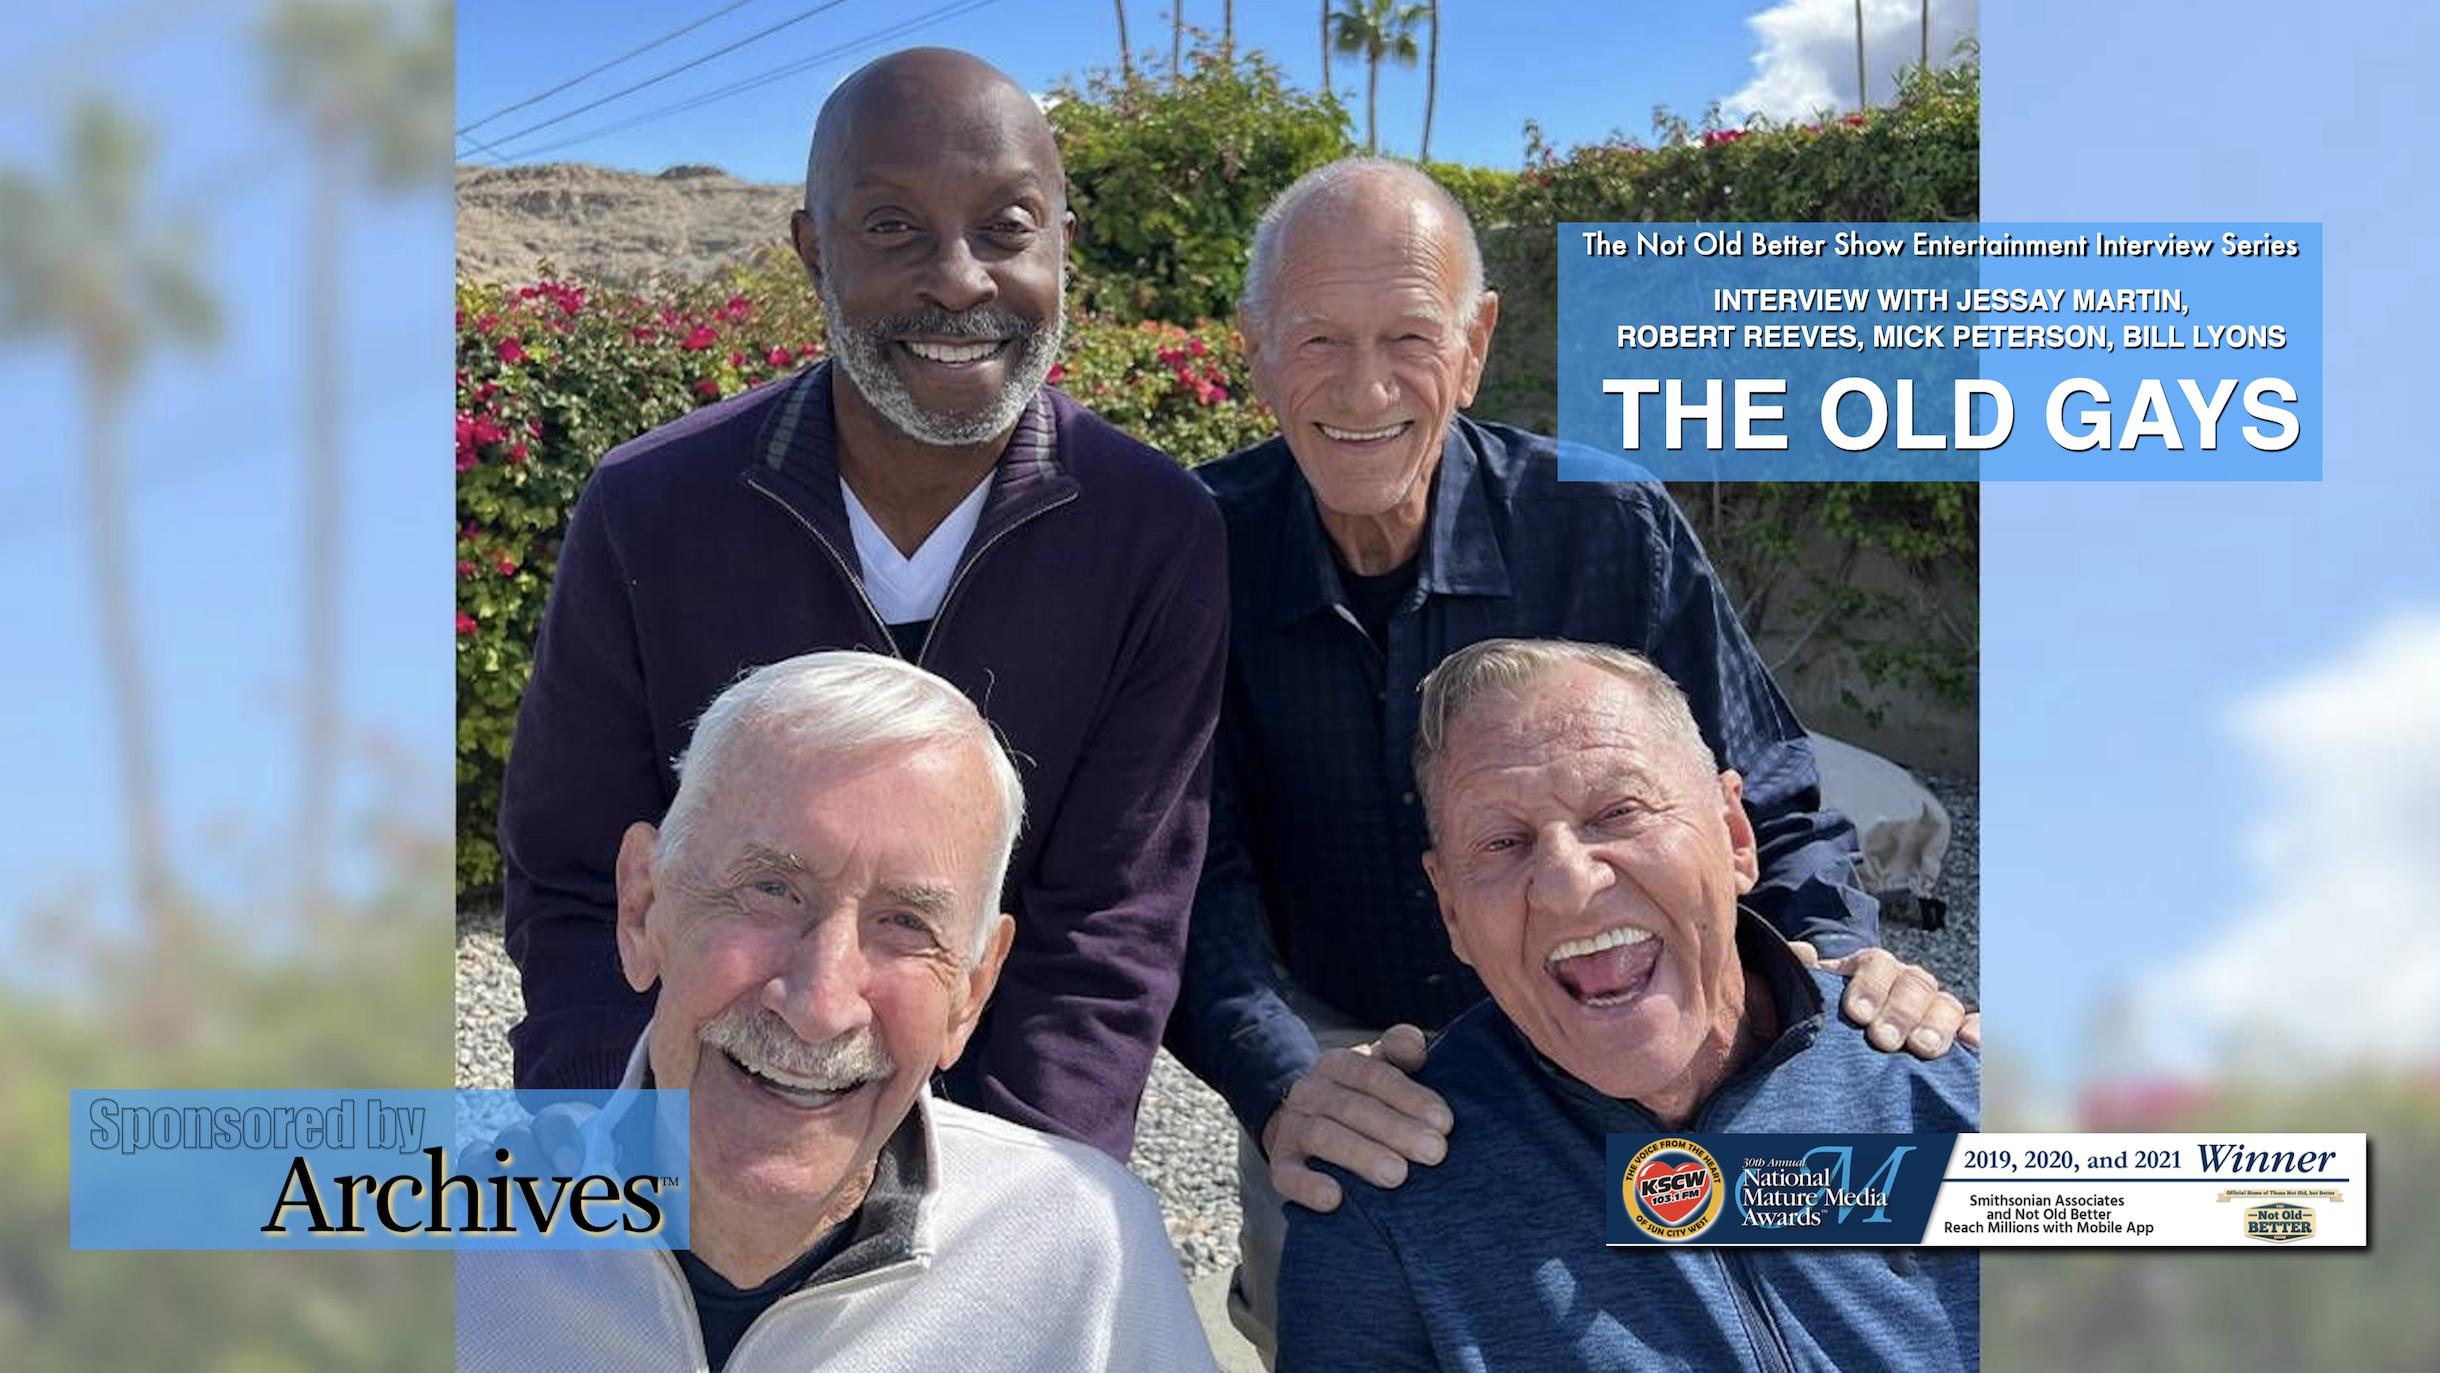 TikTok stars Robert Reeves, Mick Peterson, Bill Lyons and Jessay Martin — known collectively as the “Old Gays”